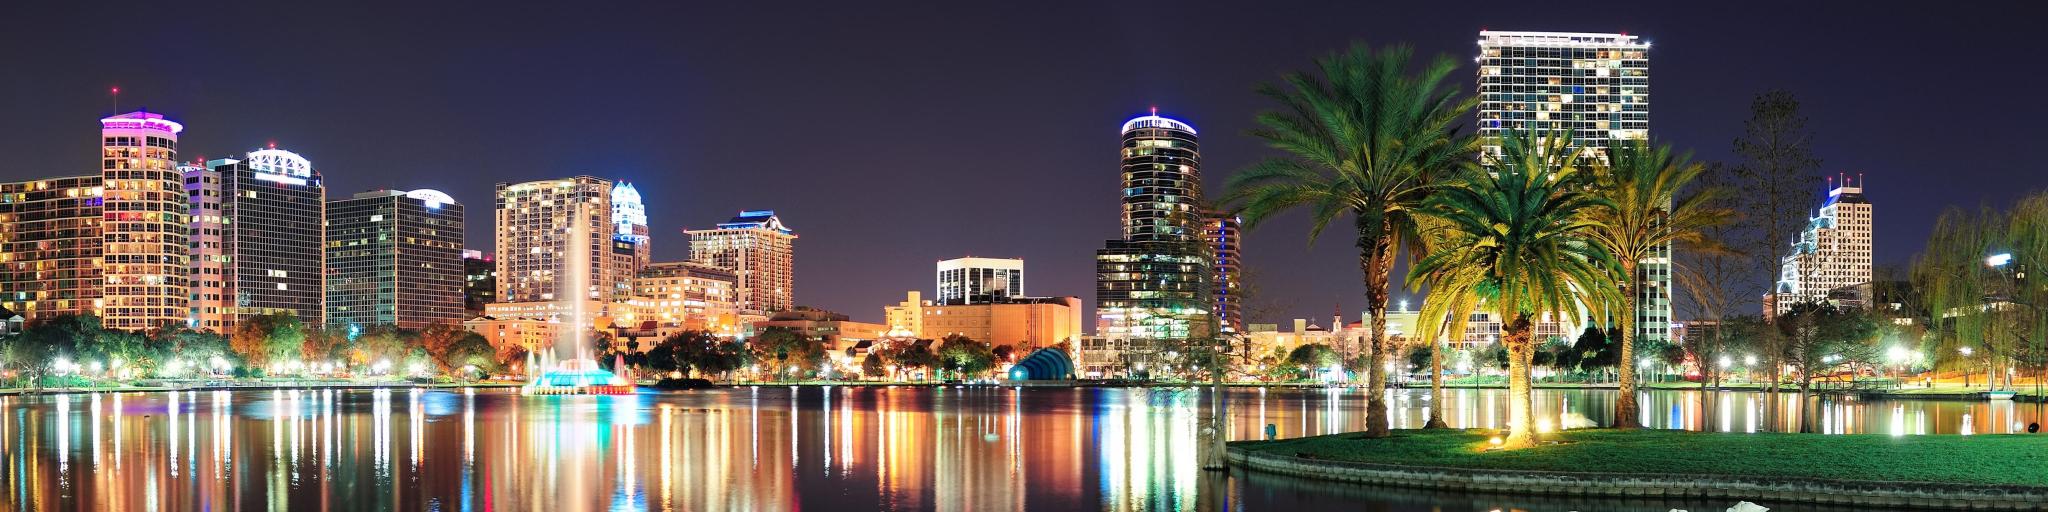 Orlando downtown skyline panorama over Lake Eola at night with urban skyscrapers and clear sky.